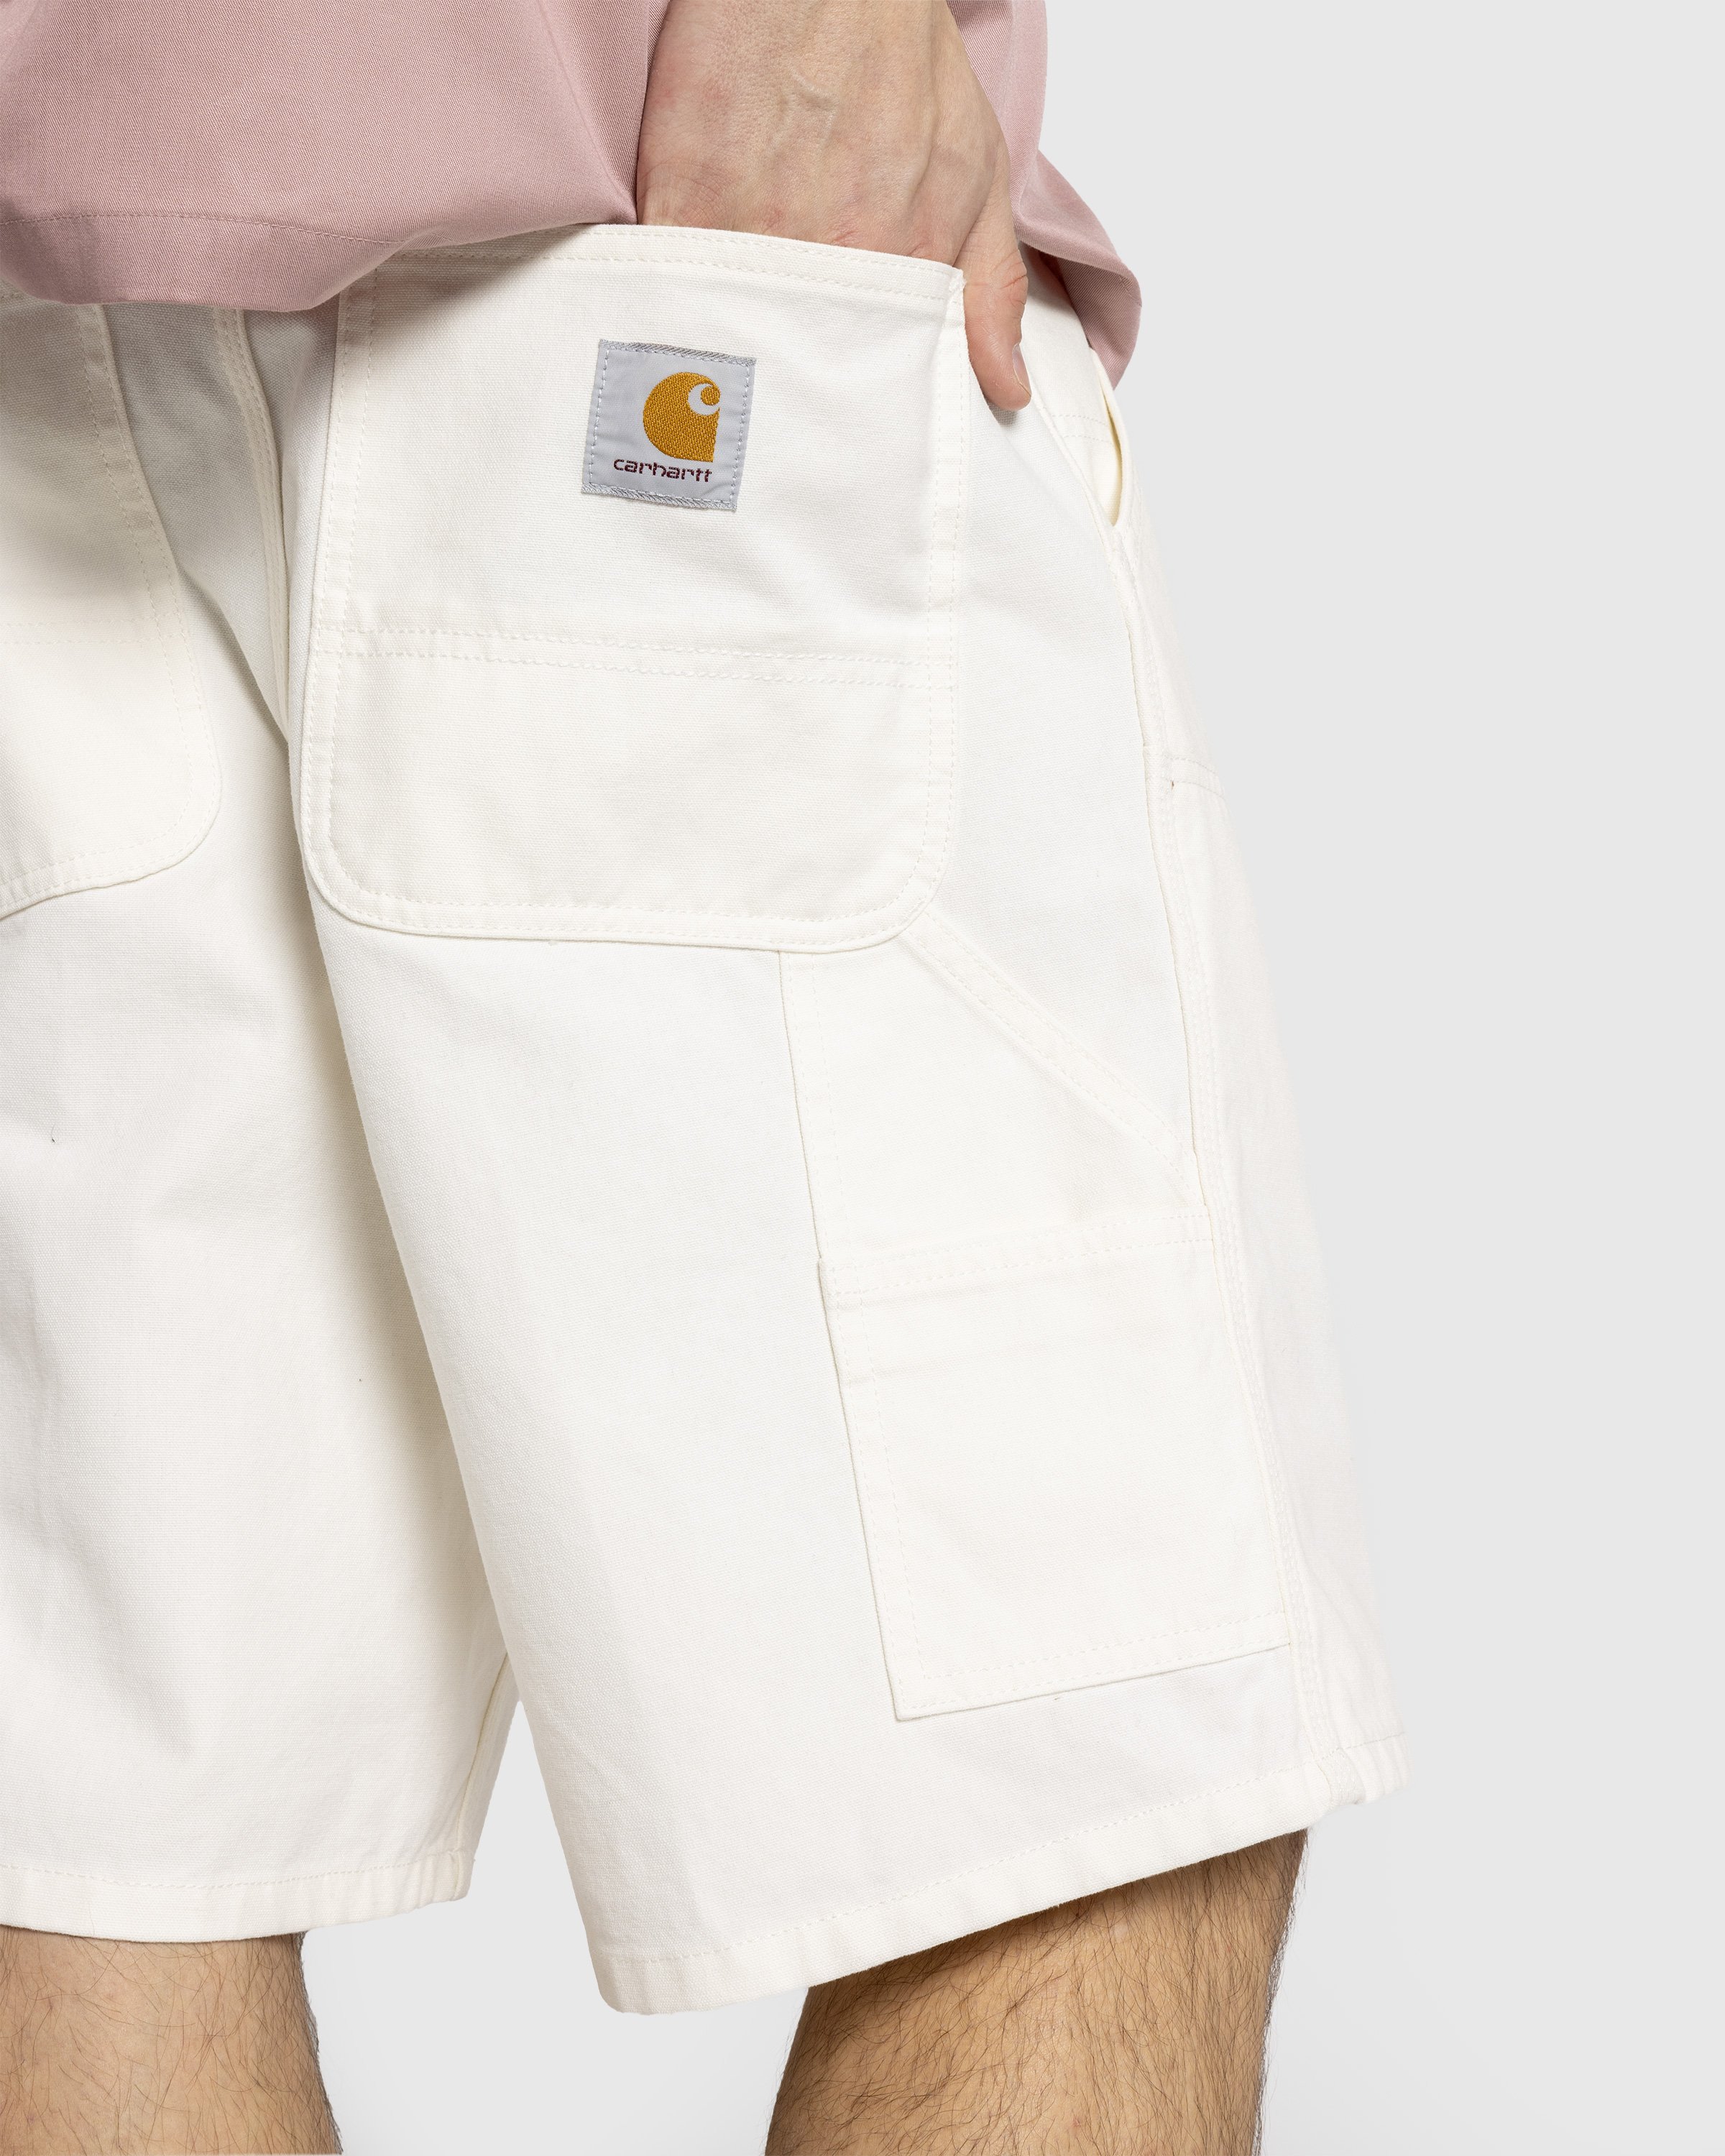 Carhartt WIP - Double Knee Short Wax /rinsed - Clothing - White - Image 5